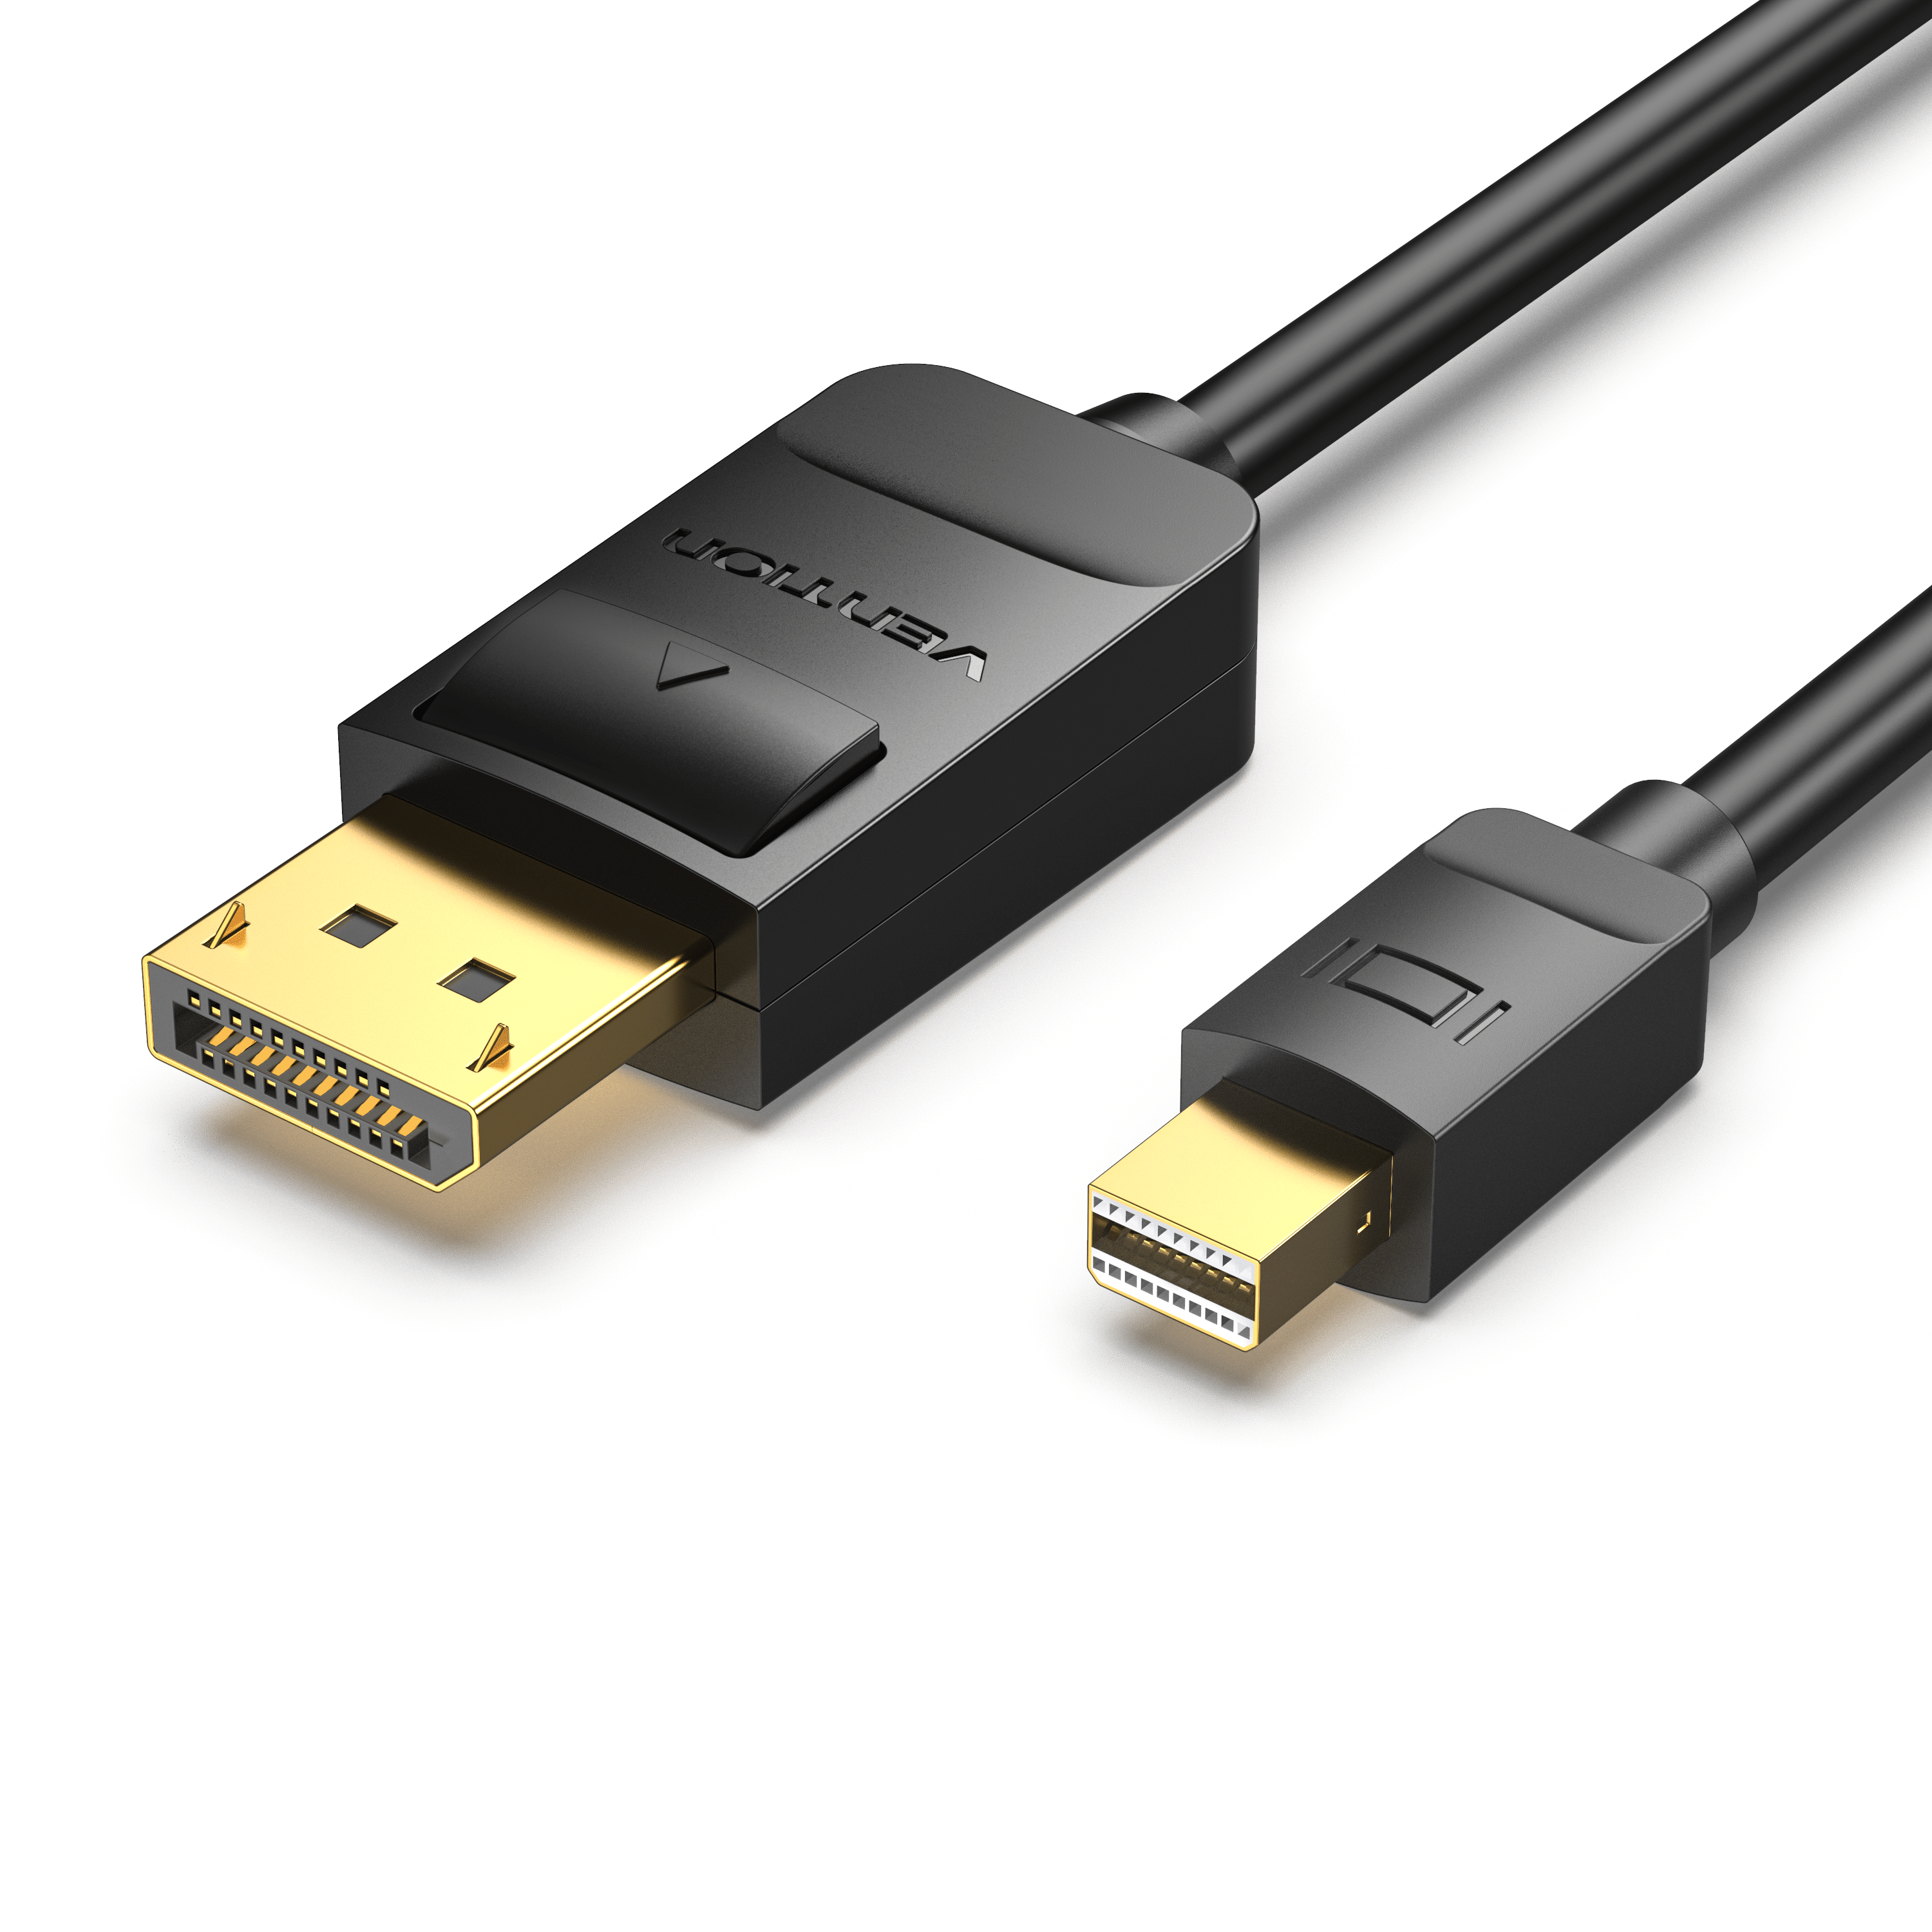 VENTION 速卖通 Mini DisplayPort to DisplayPort Cable 4K 2K Male to Male Thunderbolt 2